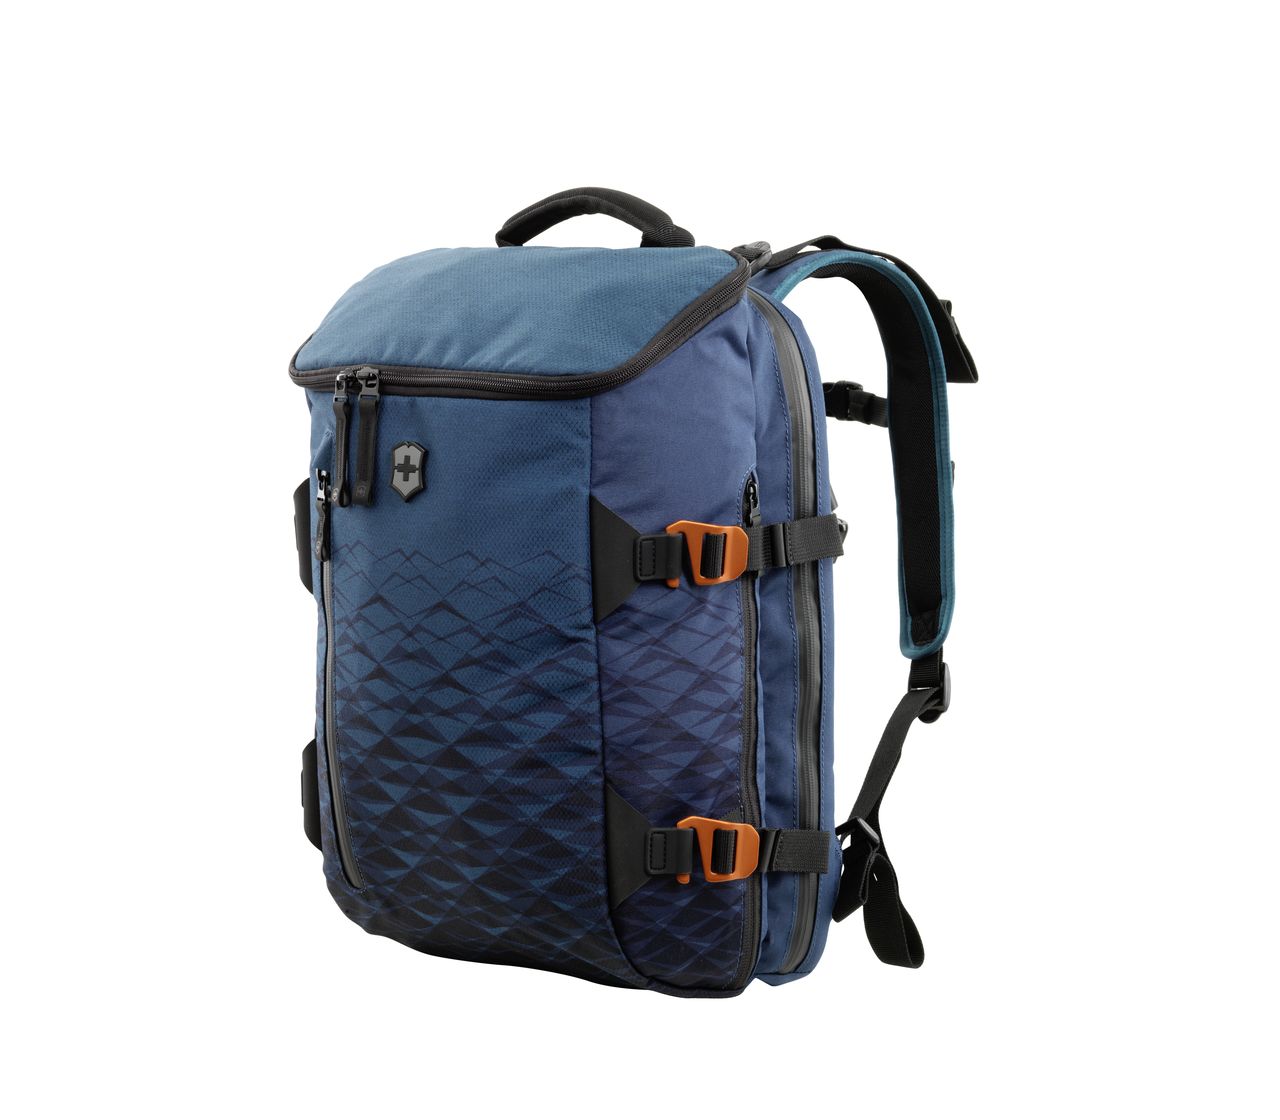 Victorinox Vx Touring 15'' Laptop Backpack in Teal Blue - 601493